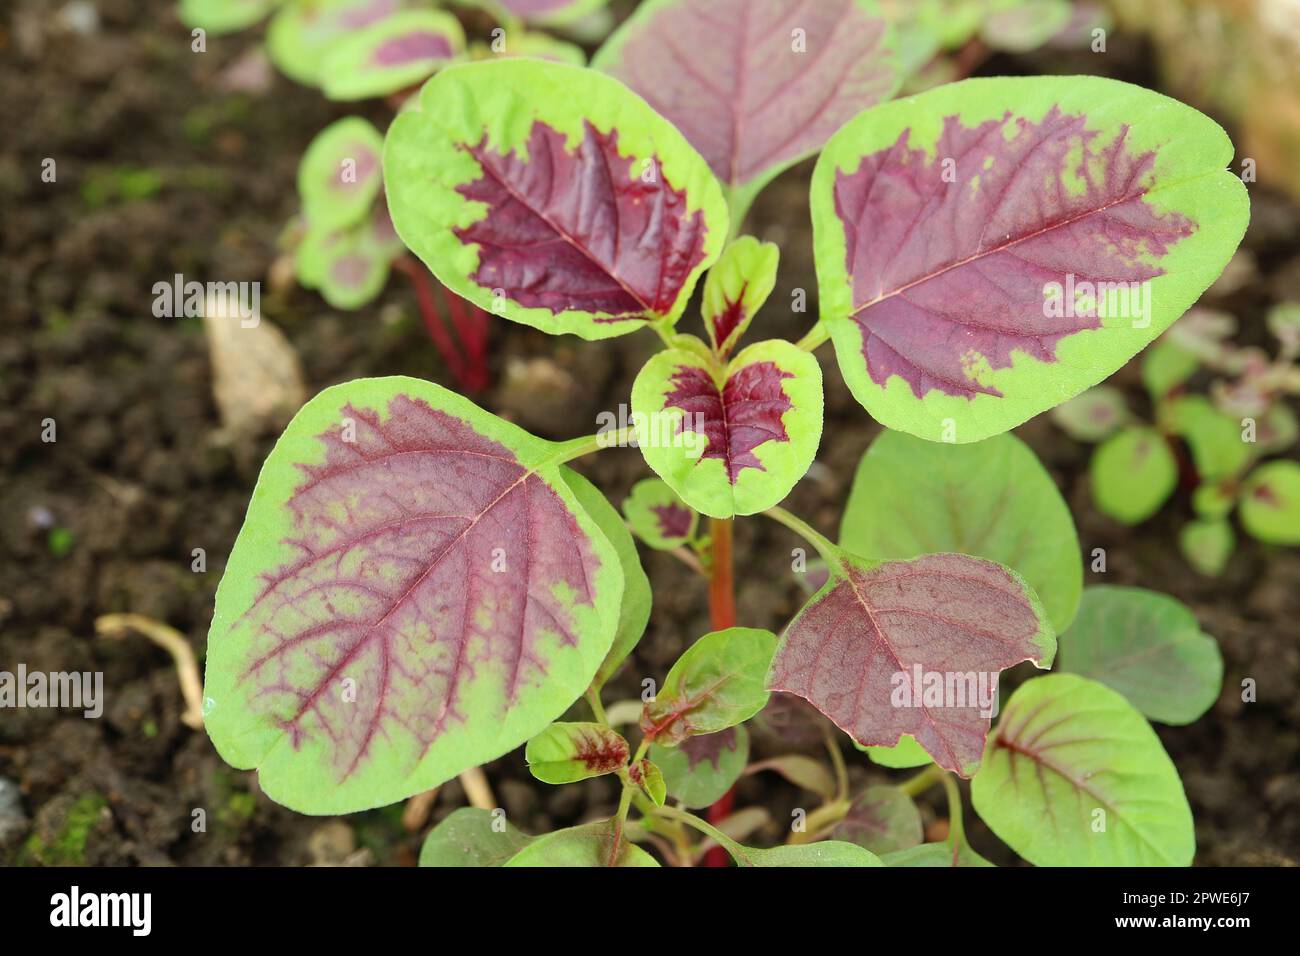 Closeup of Immature Red spinach or Red Amaranth Plants Growing in the Sunlight Stock Photo